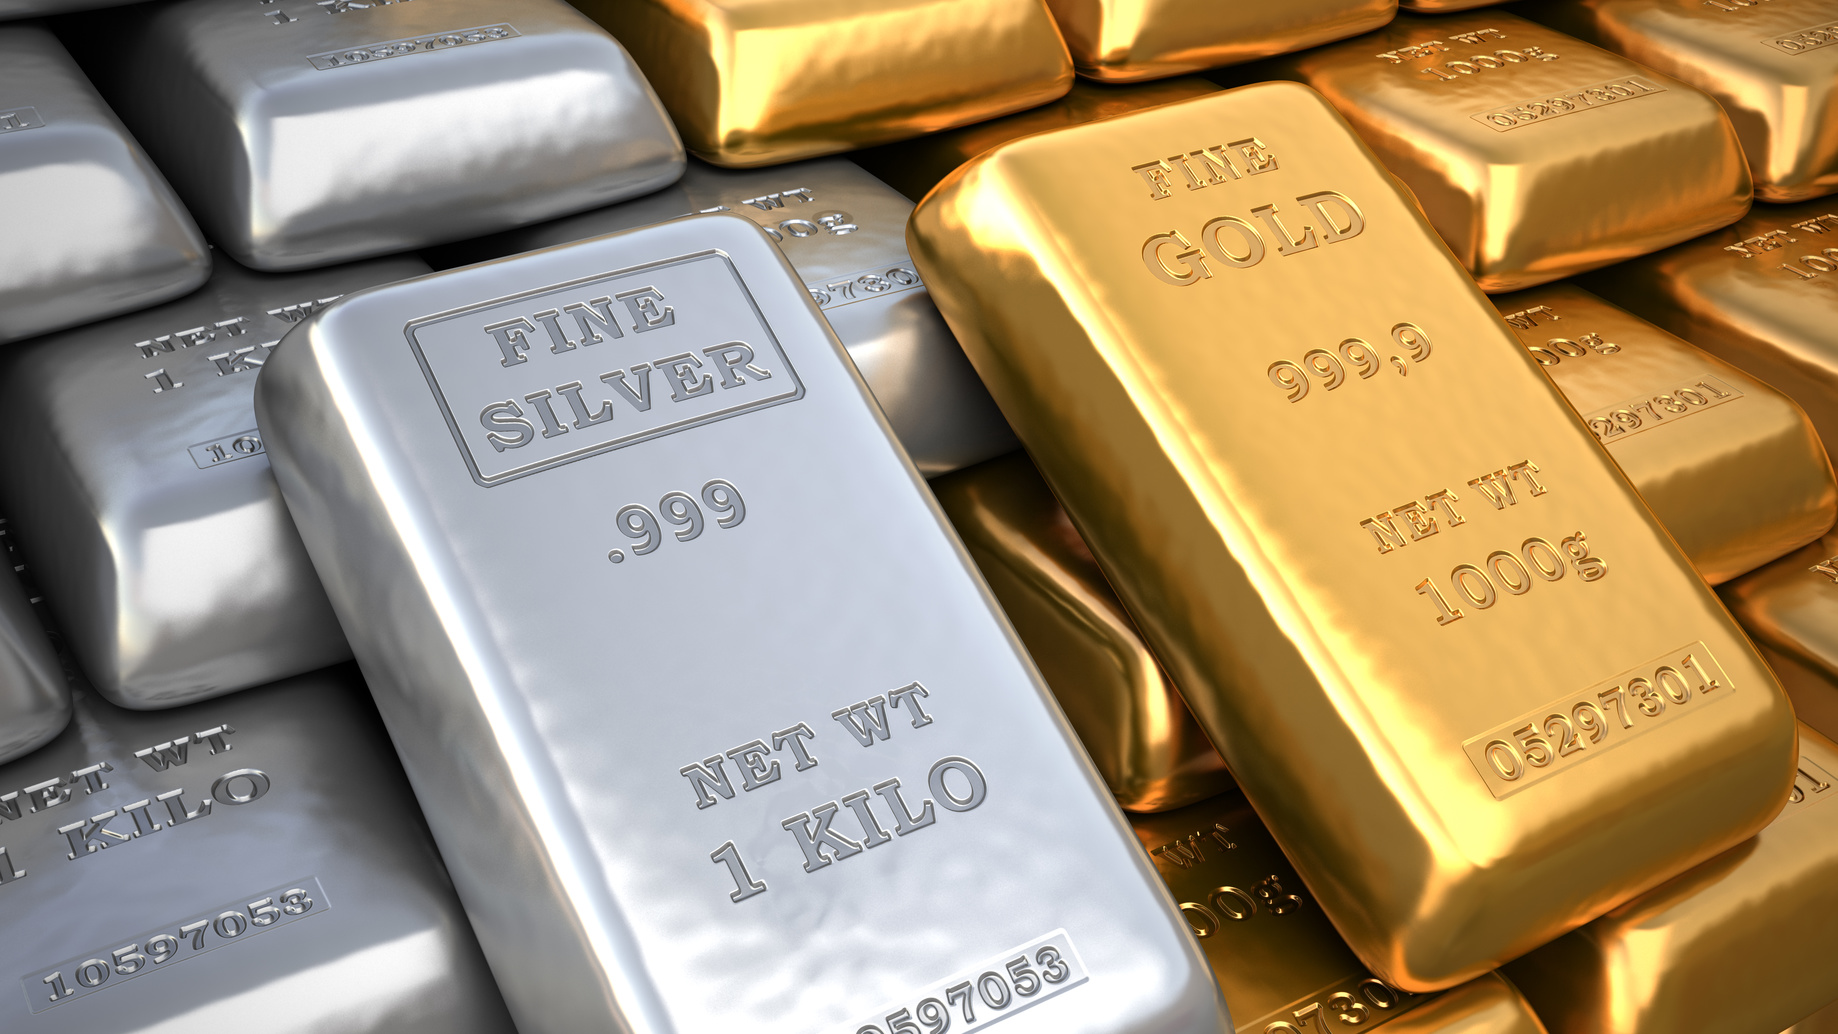 Silver Will Be The New Bitcoin, Only A Matter Of Time – Keith Neumeyer